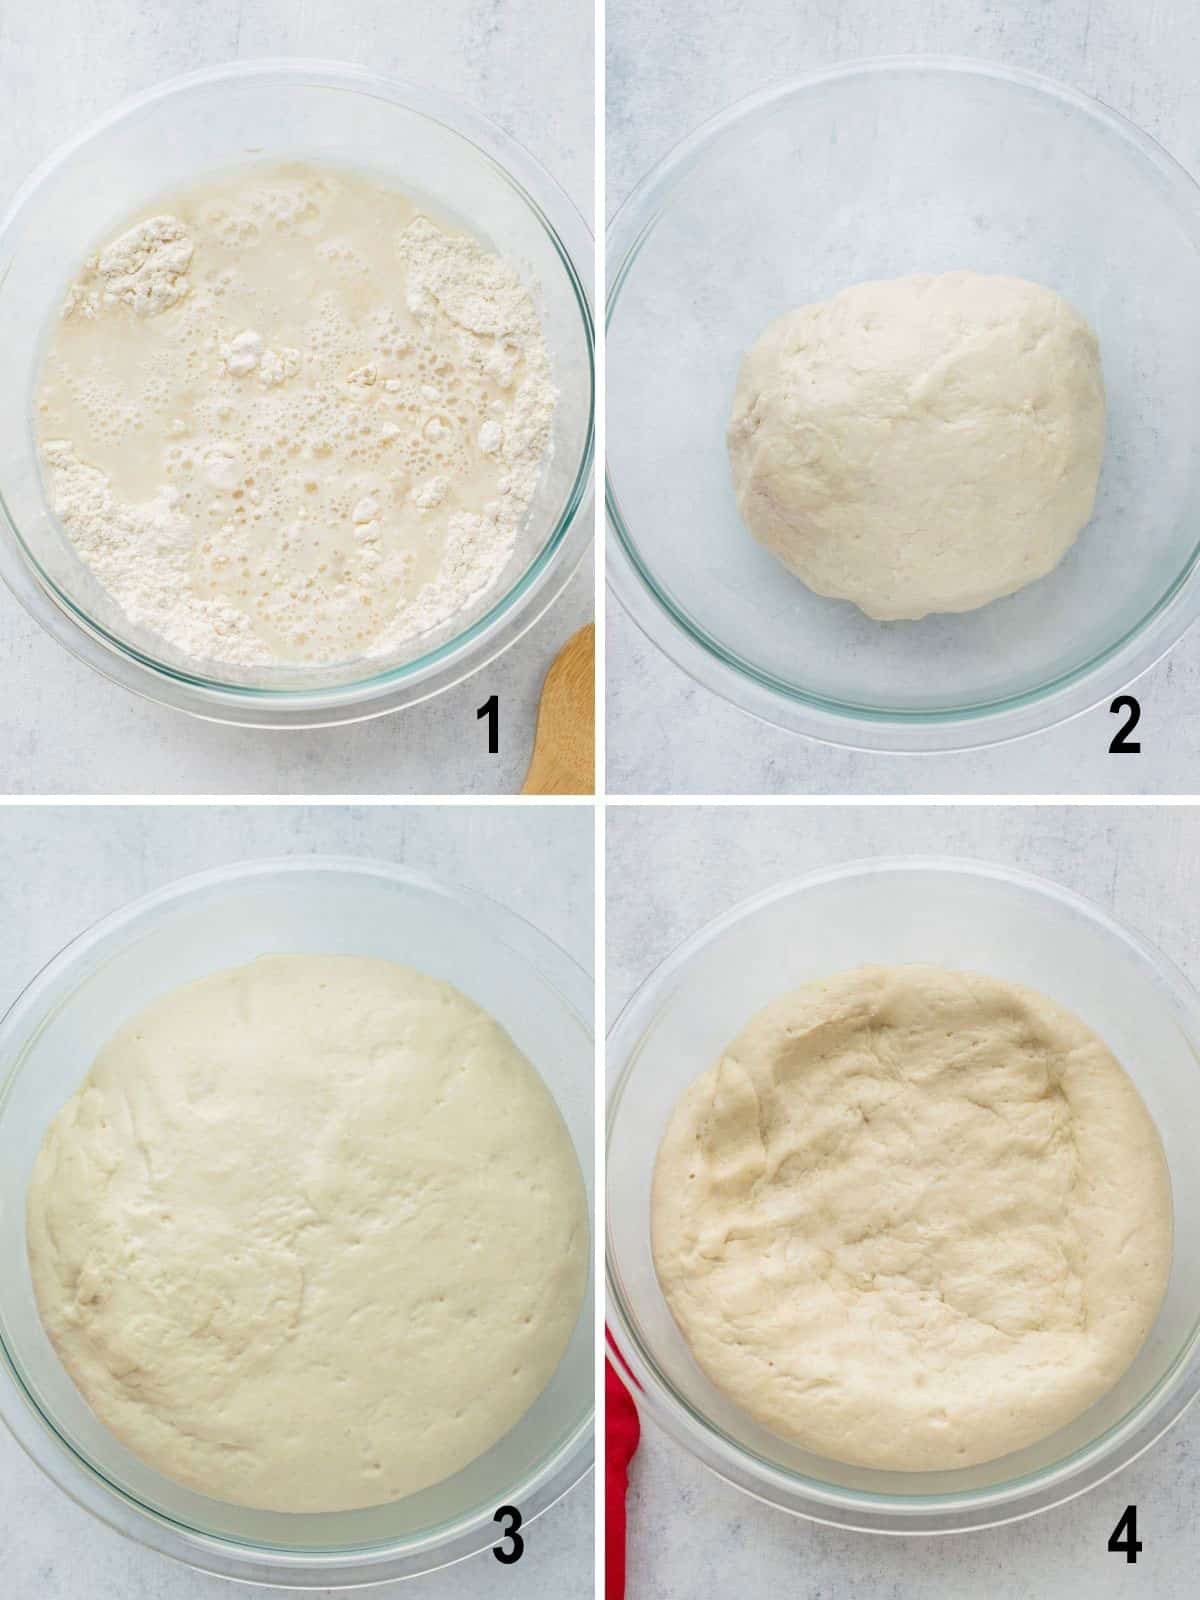 bowl of flour and water, ball of dough, risen dough, punched down dough